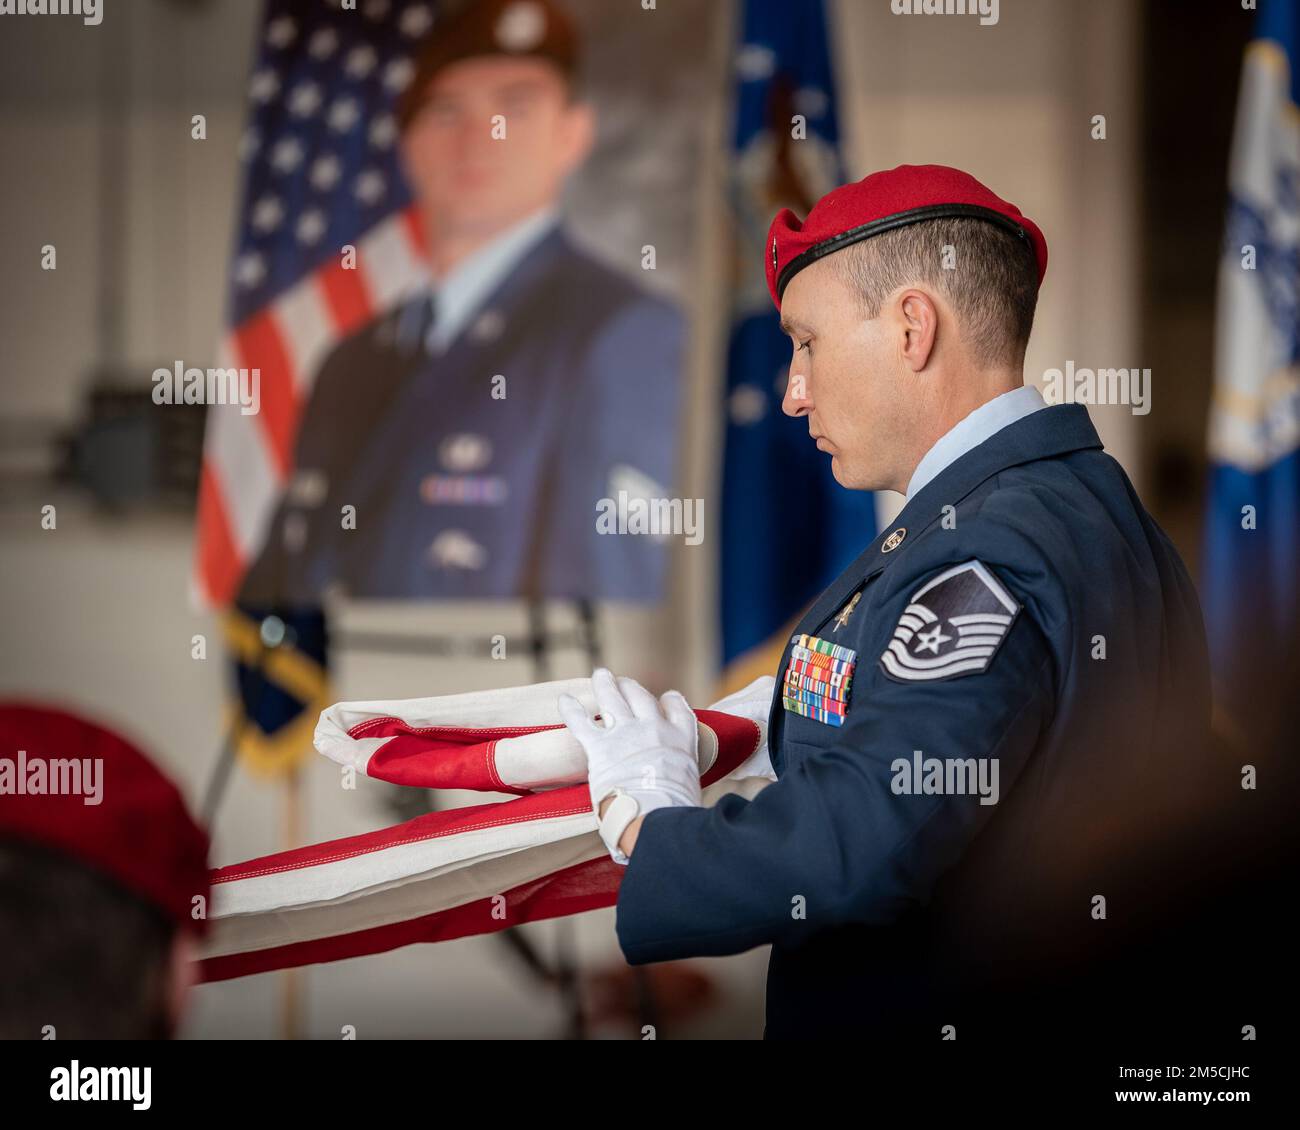 Members of the 123rd Special Tactics Squadron honor a fallen Airman with a flag-folding ceremony during a memorial service at the Kentucky Air National Guard Base in Louisville, Ky., March 1, 2022. The Airman, who died Feb. 16, was a pararescueman with more than 18 years of service to the U.S. Air Force and Air National Guard. Stock Photo